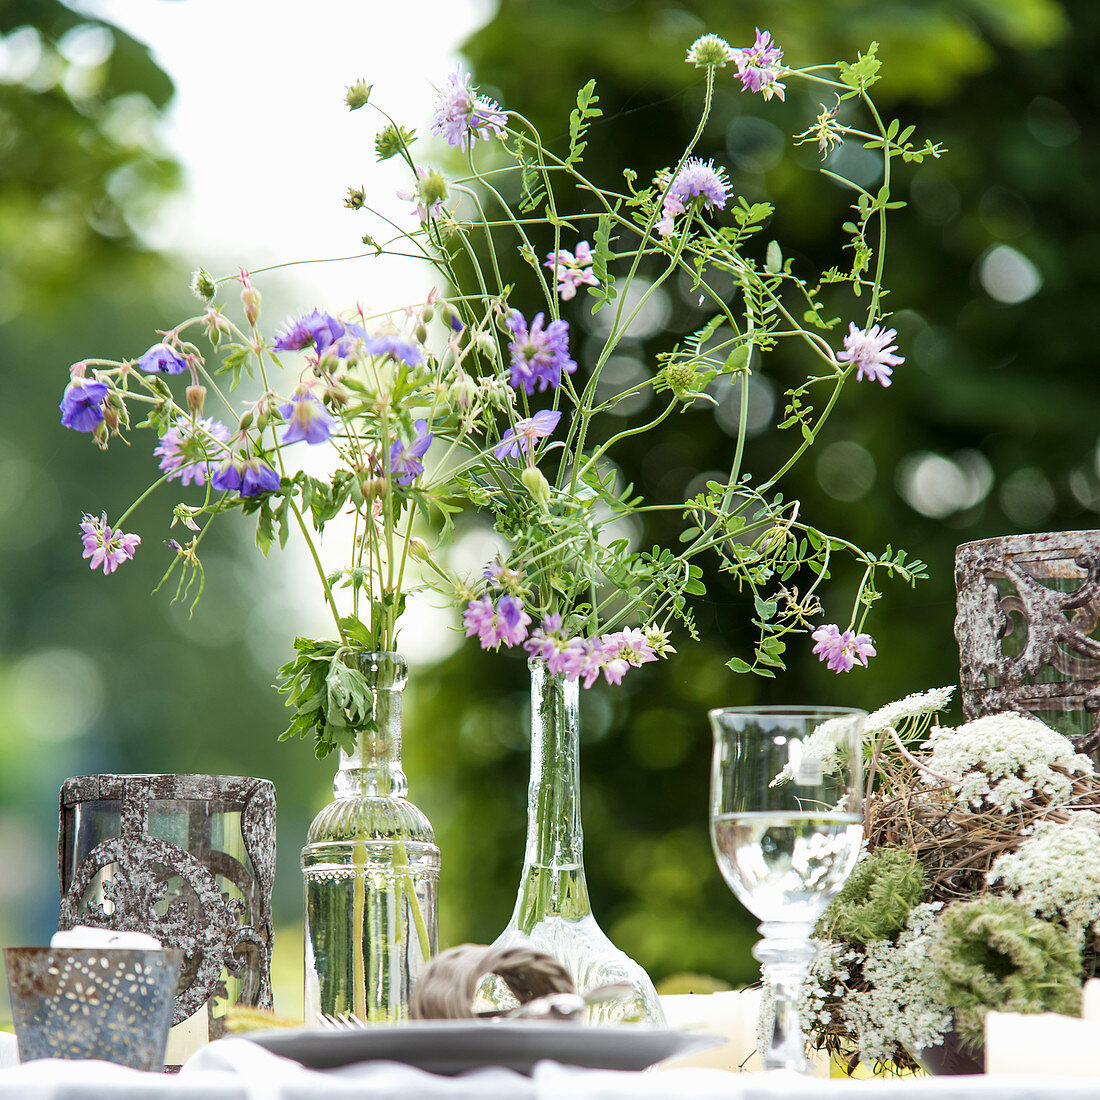 Delicate wildflowers in shades of purple in glass vases on set garden table